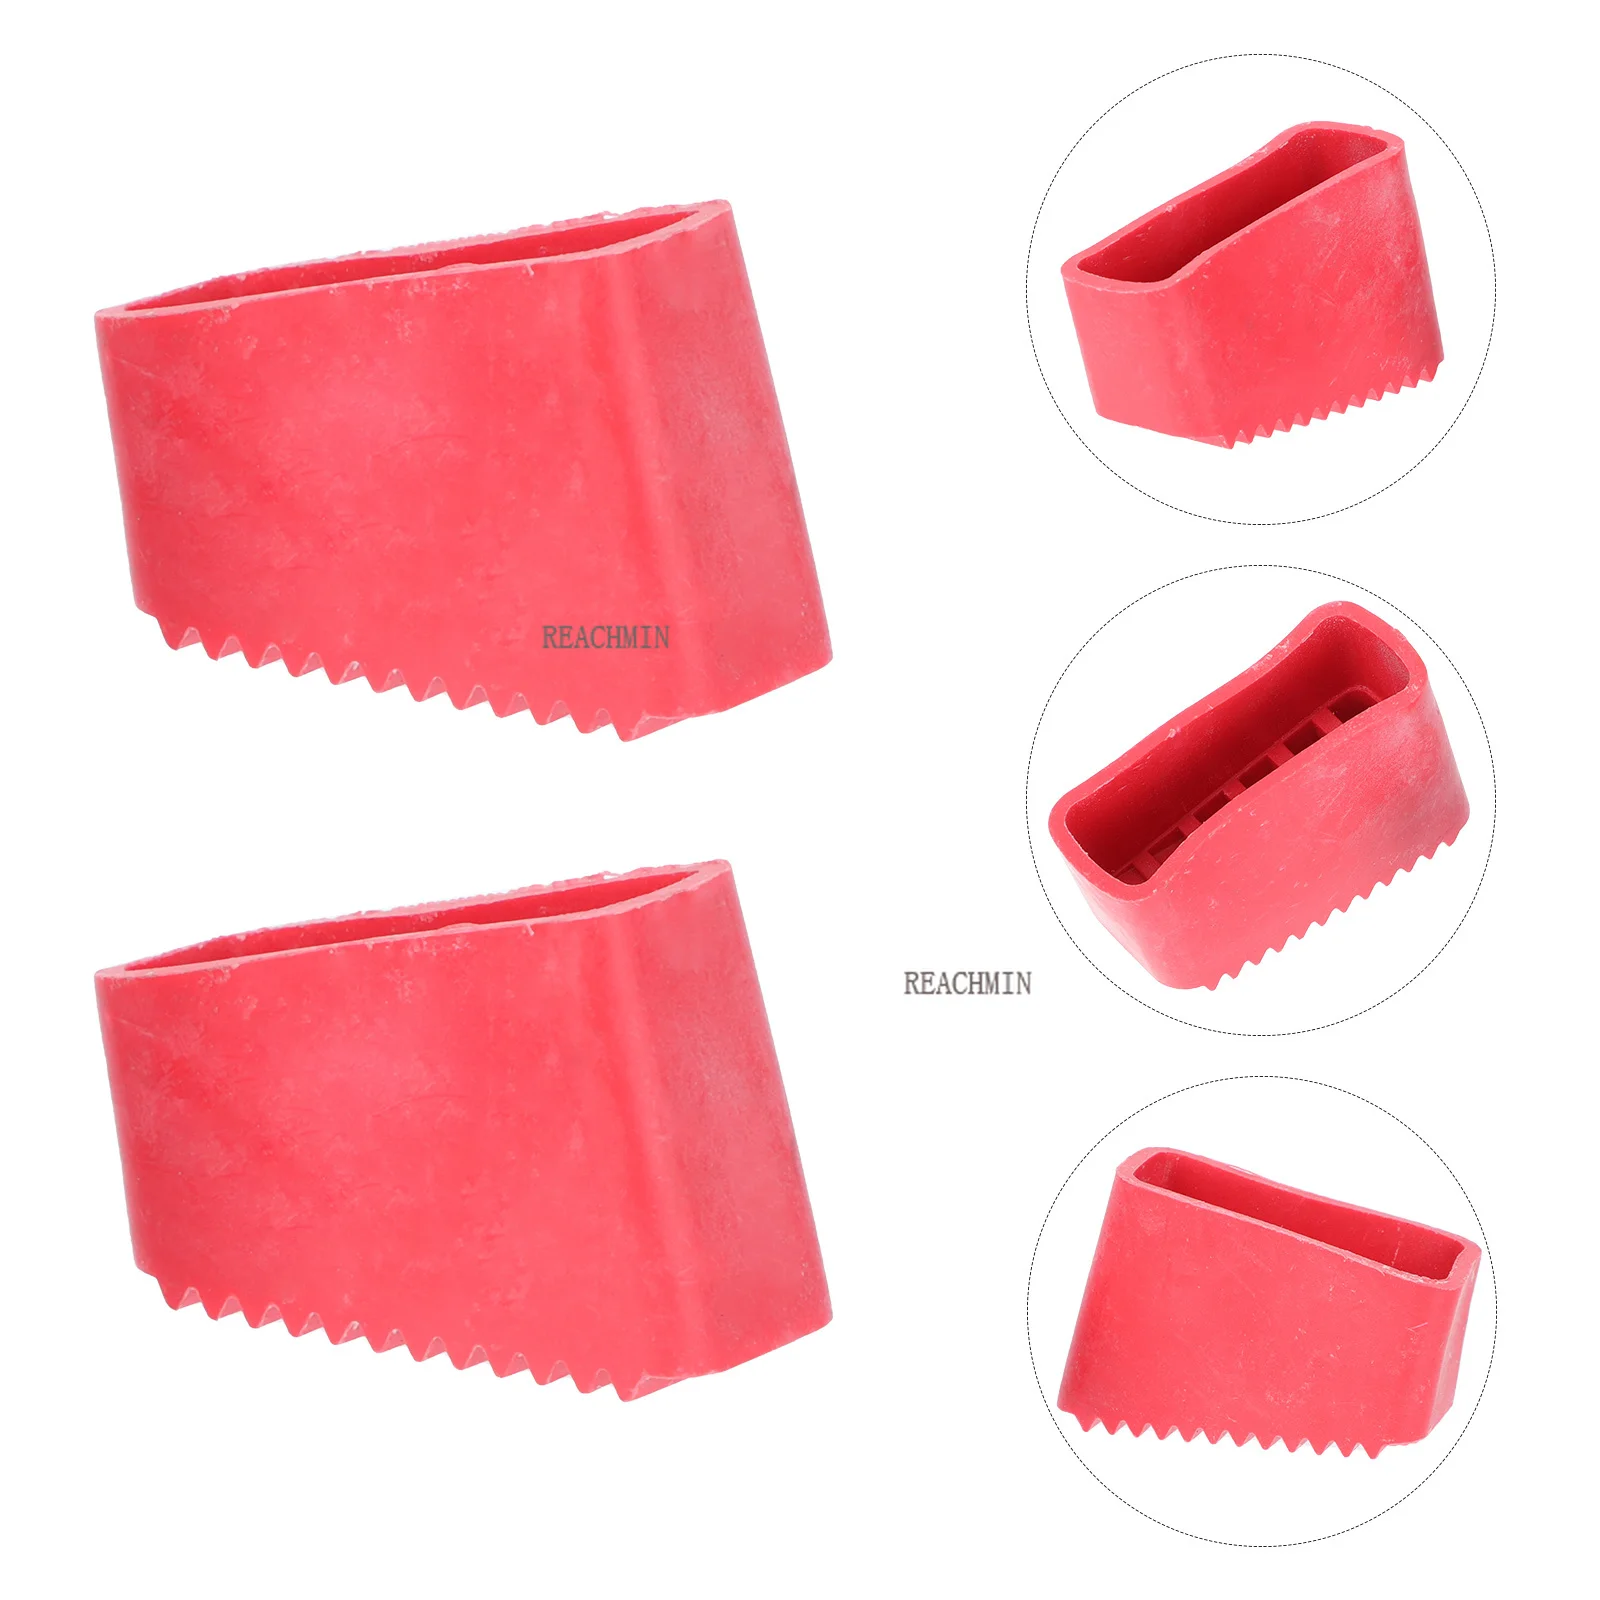 2Pcs Step Ladder Feet Covers Versatile Ladder Leg Covers Non-Skid Ladder Pads Anti-Skid Rubber Foot Pad Insulating Foot Sleeve